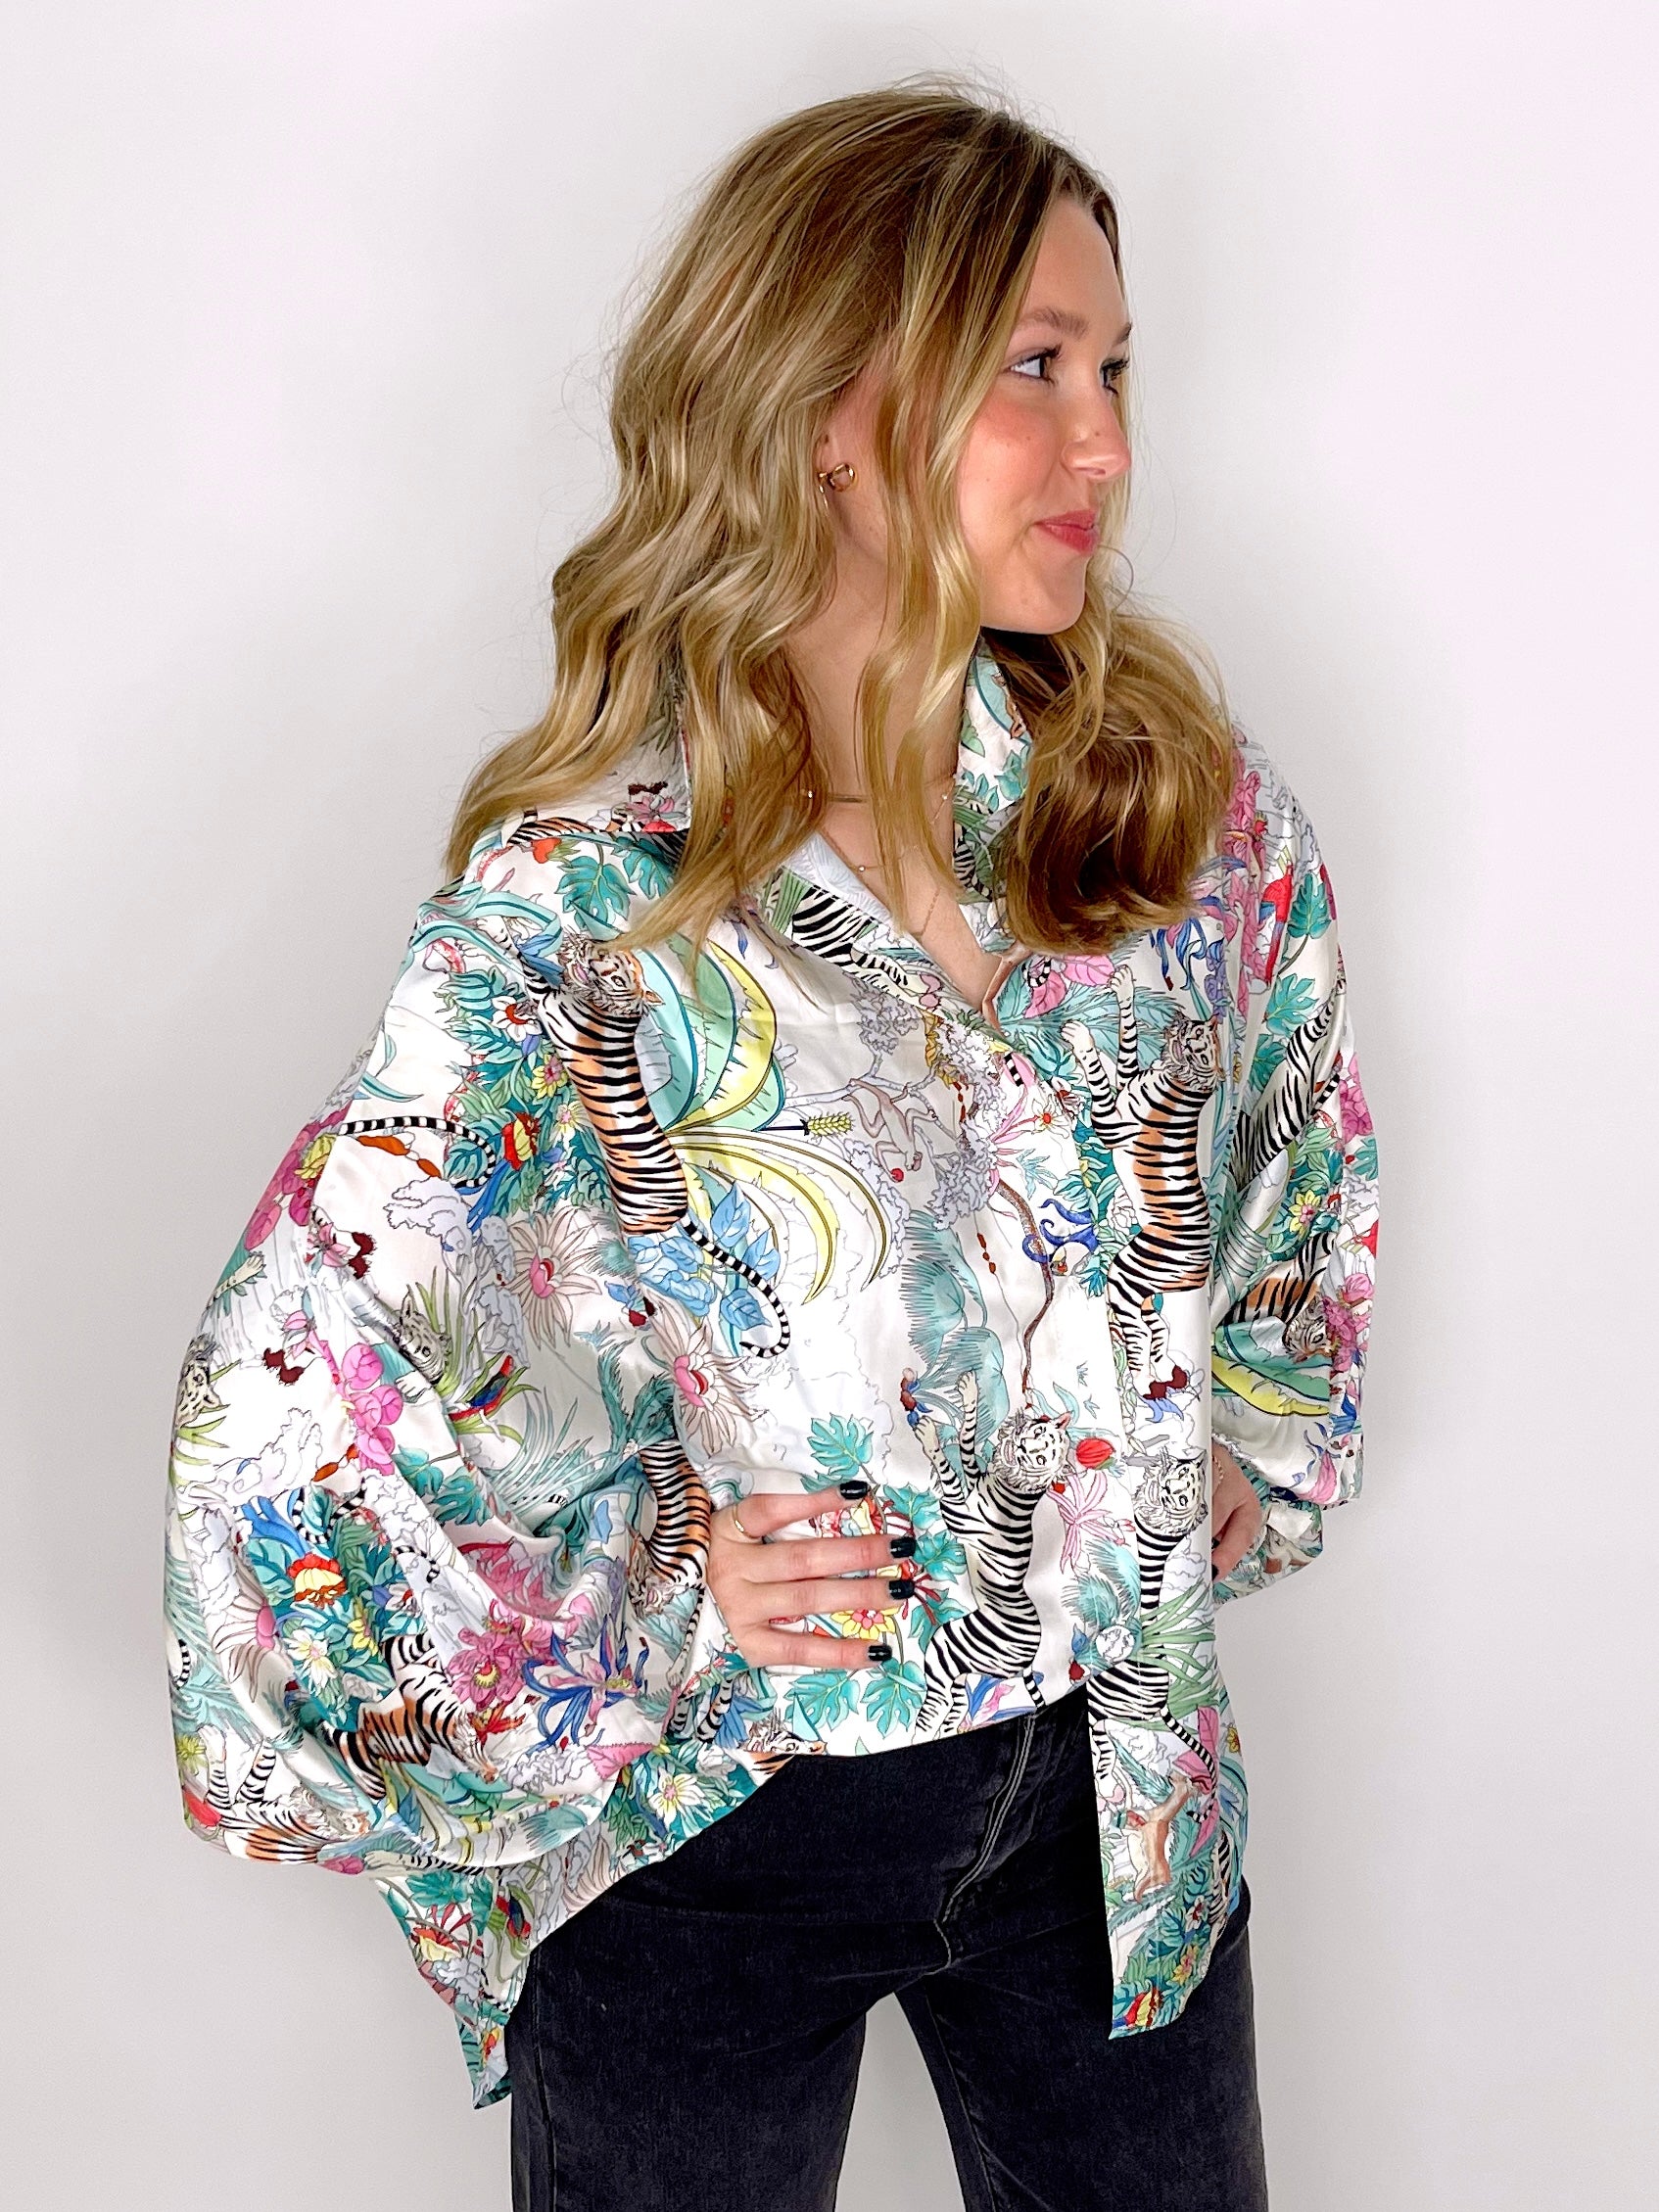 The Turks Blouse-Blouse-Beulah Style-The Village Shoppe, Women’s Fashion Boutique, Shop Online and In Store - Located in Muscle Shoals, AL.